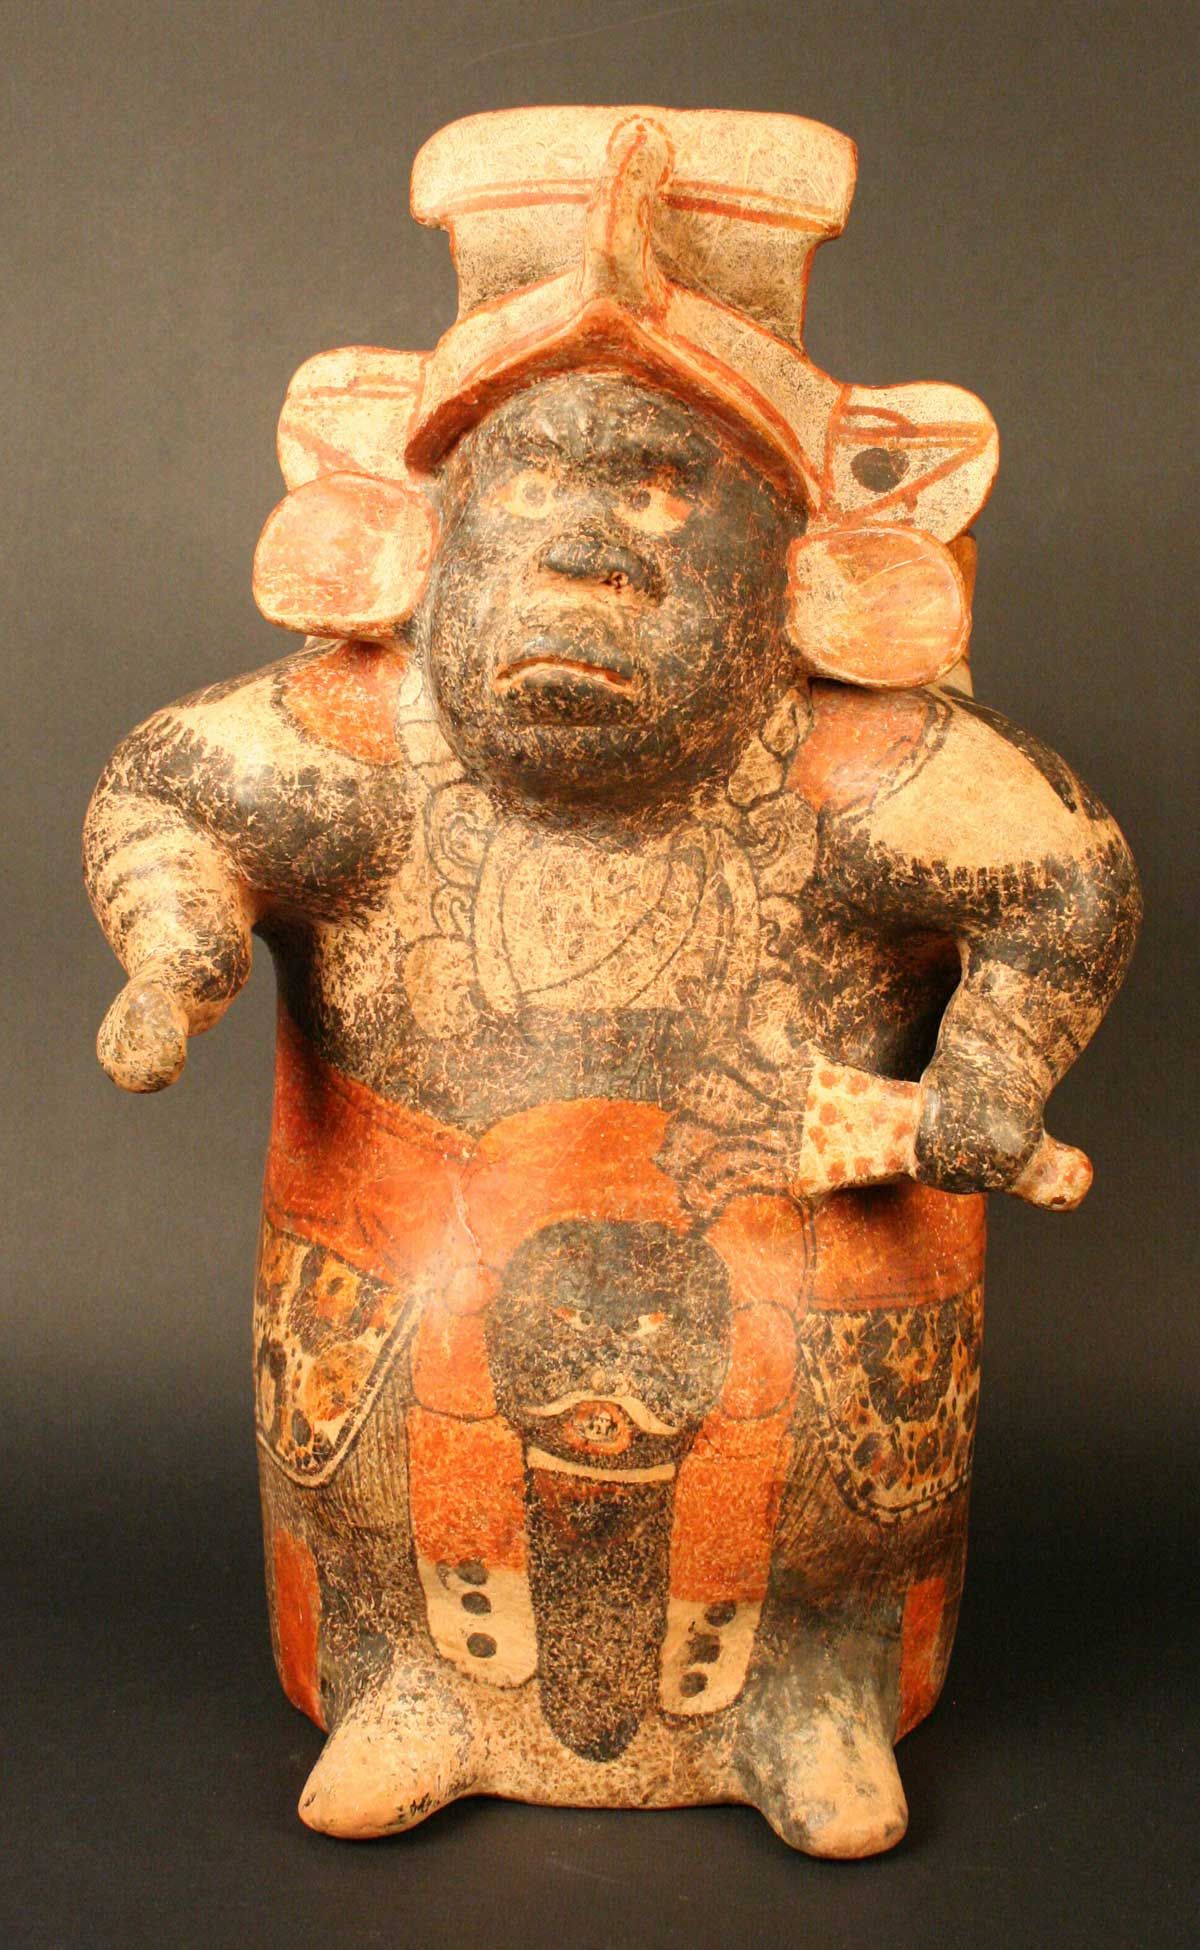 A Maya ceramic vase in the form of a hunchbacked dwarf. 600-900 CE, now housed at the Chilean Museum of Pre-Columbian Art.jpg